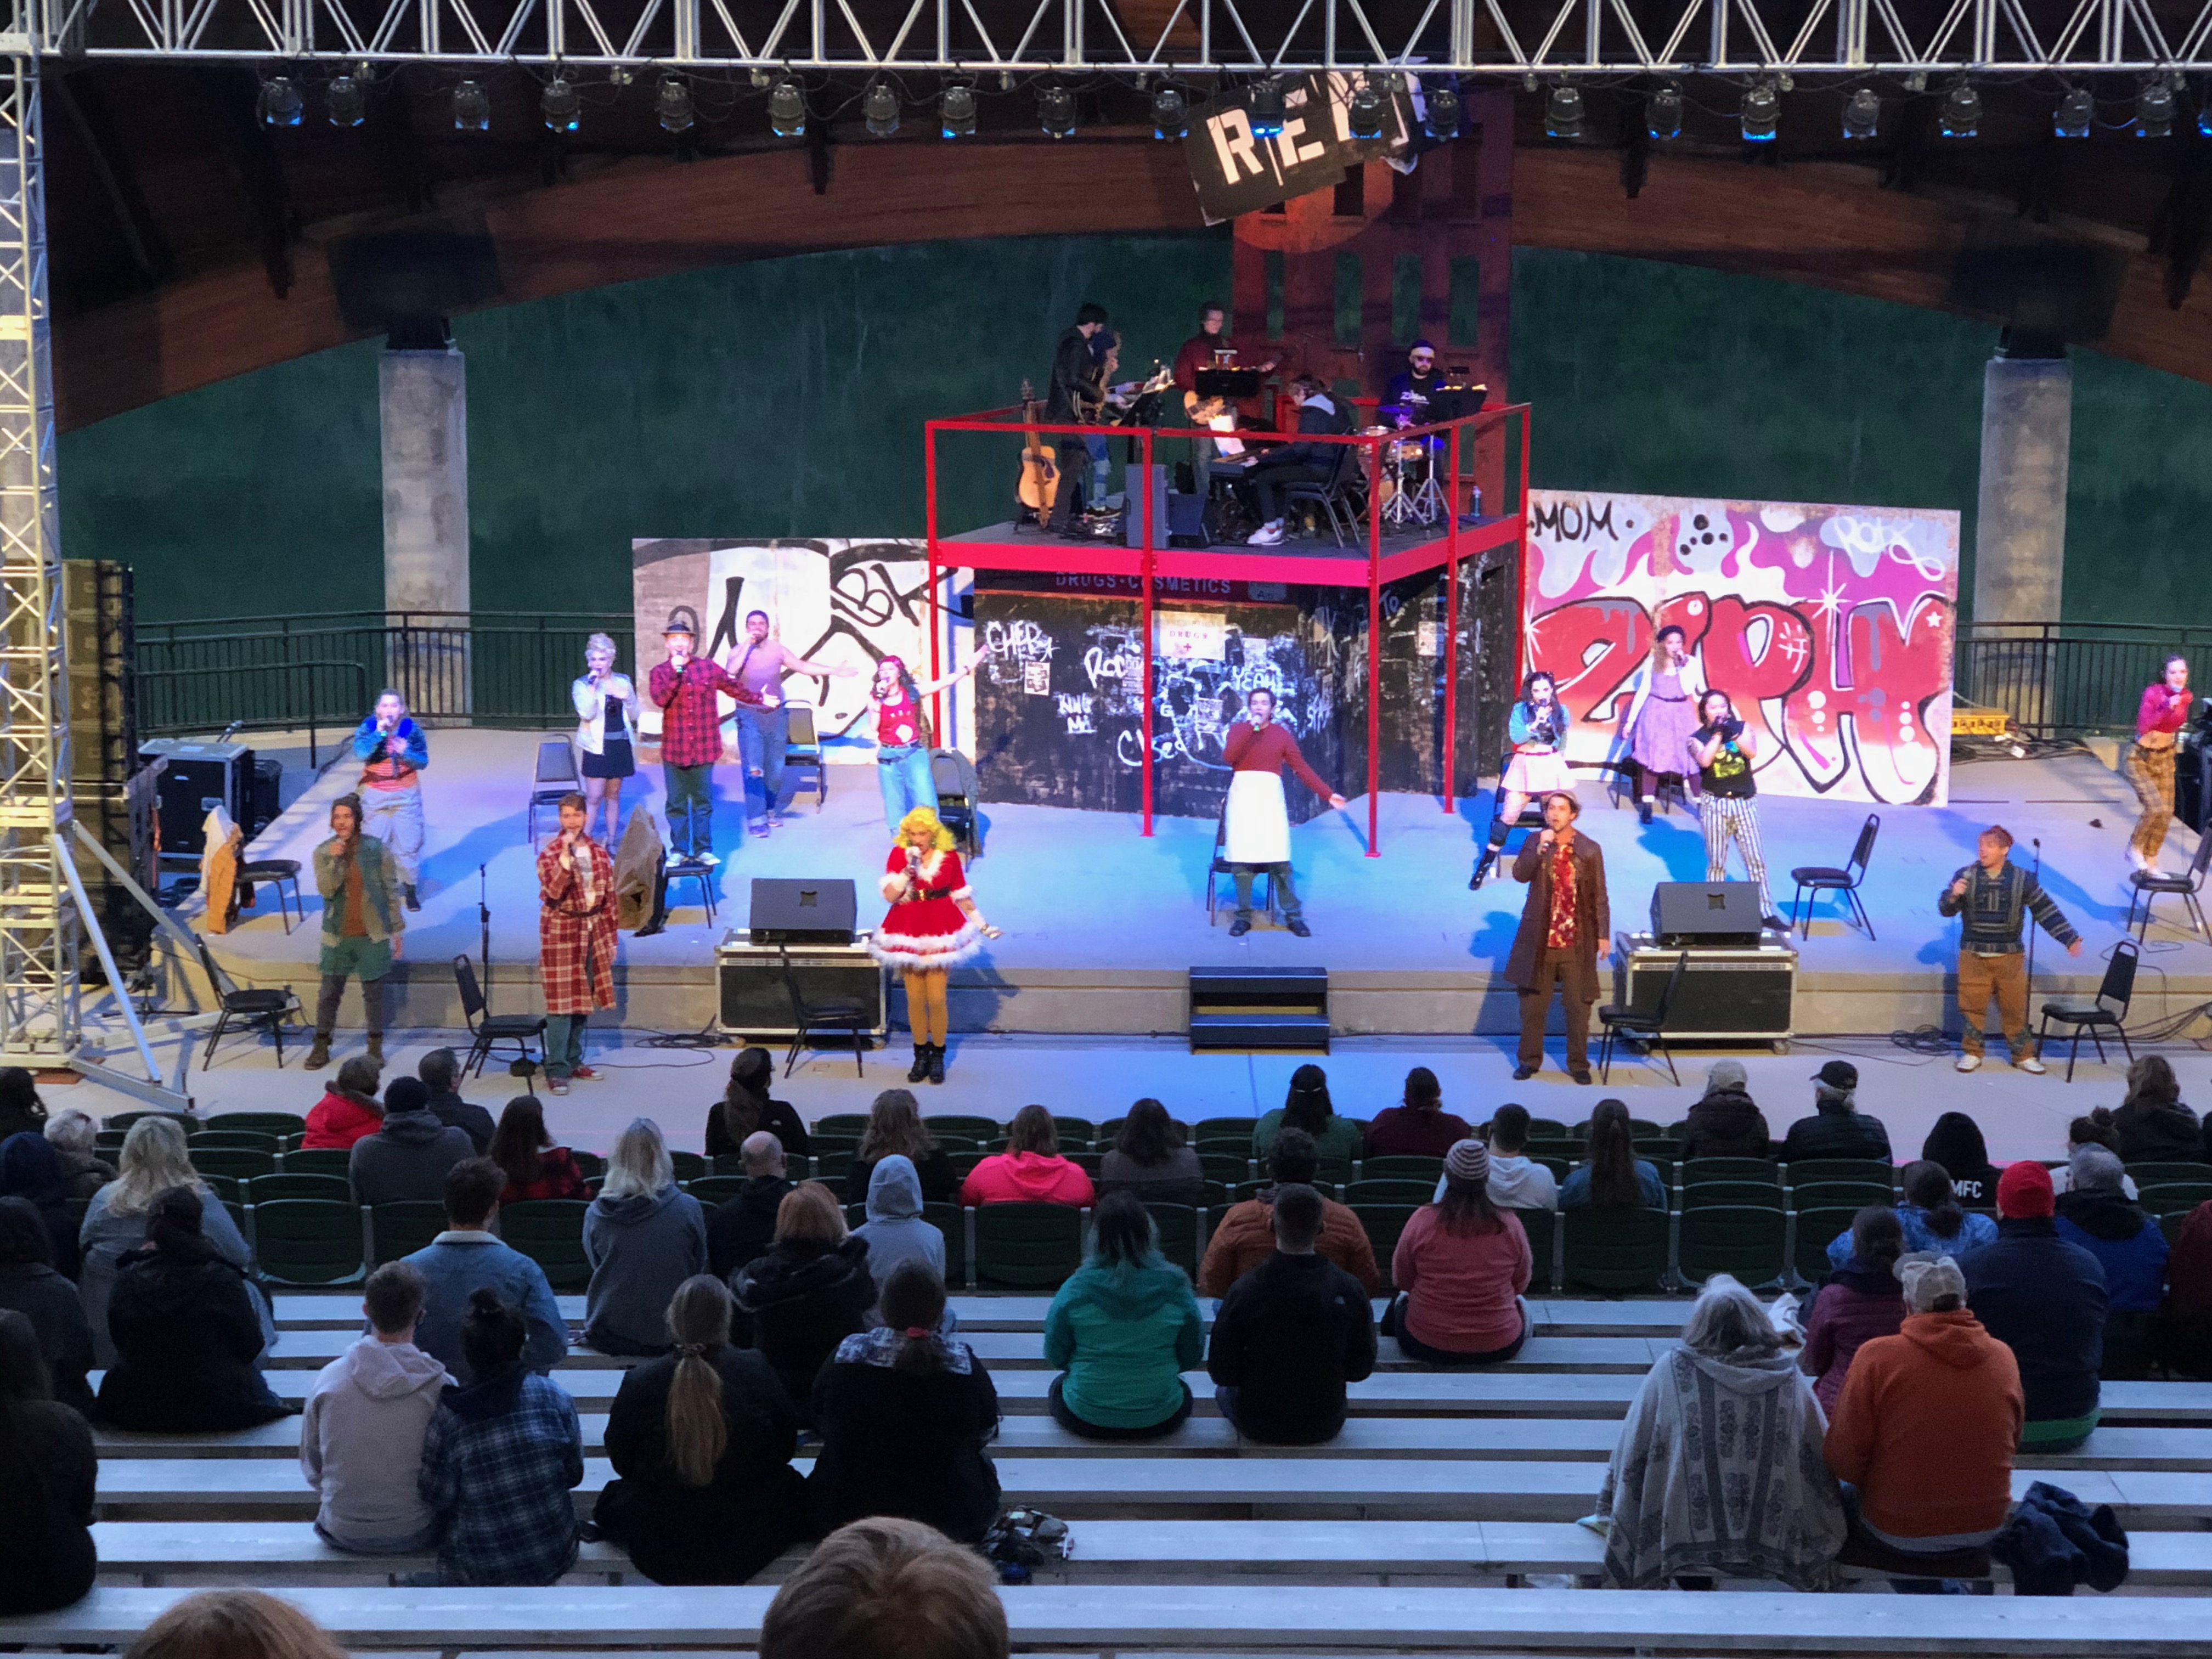 A performance of RENT on stage at the Hazel Ruby McQuain Amphitheatre